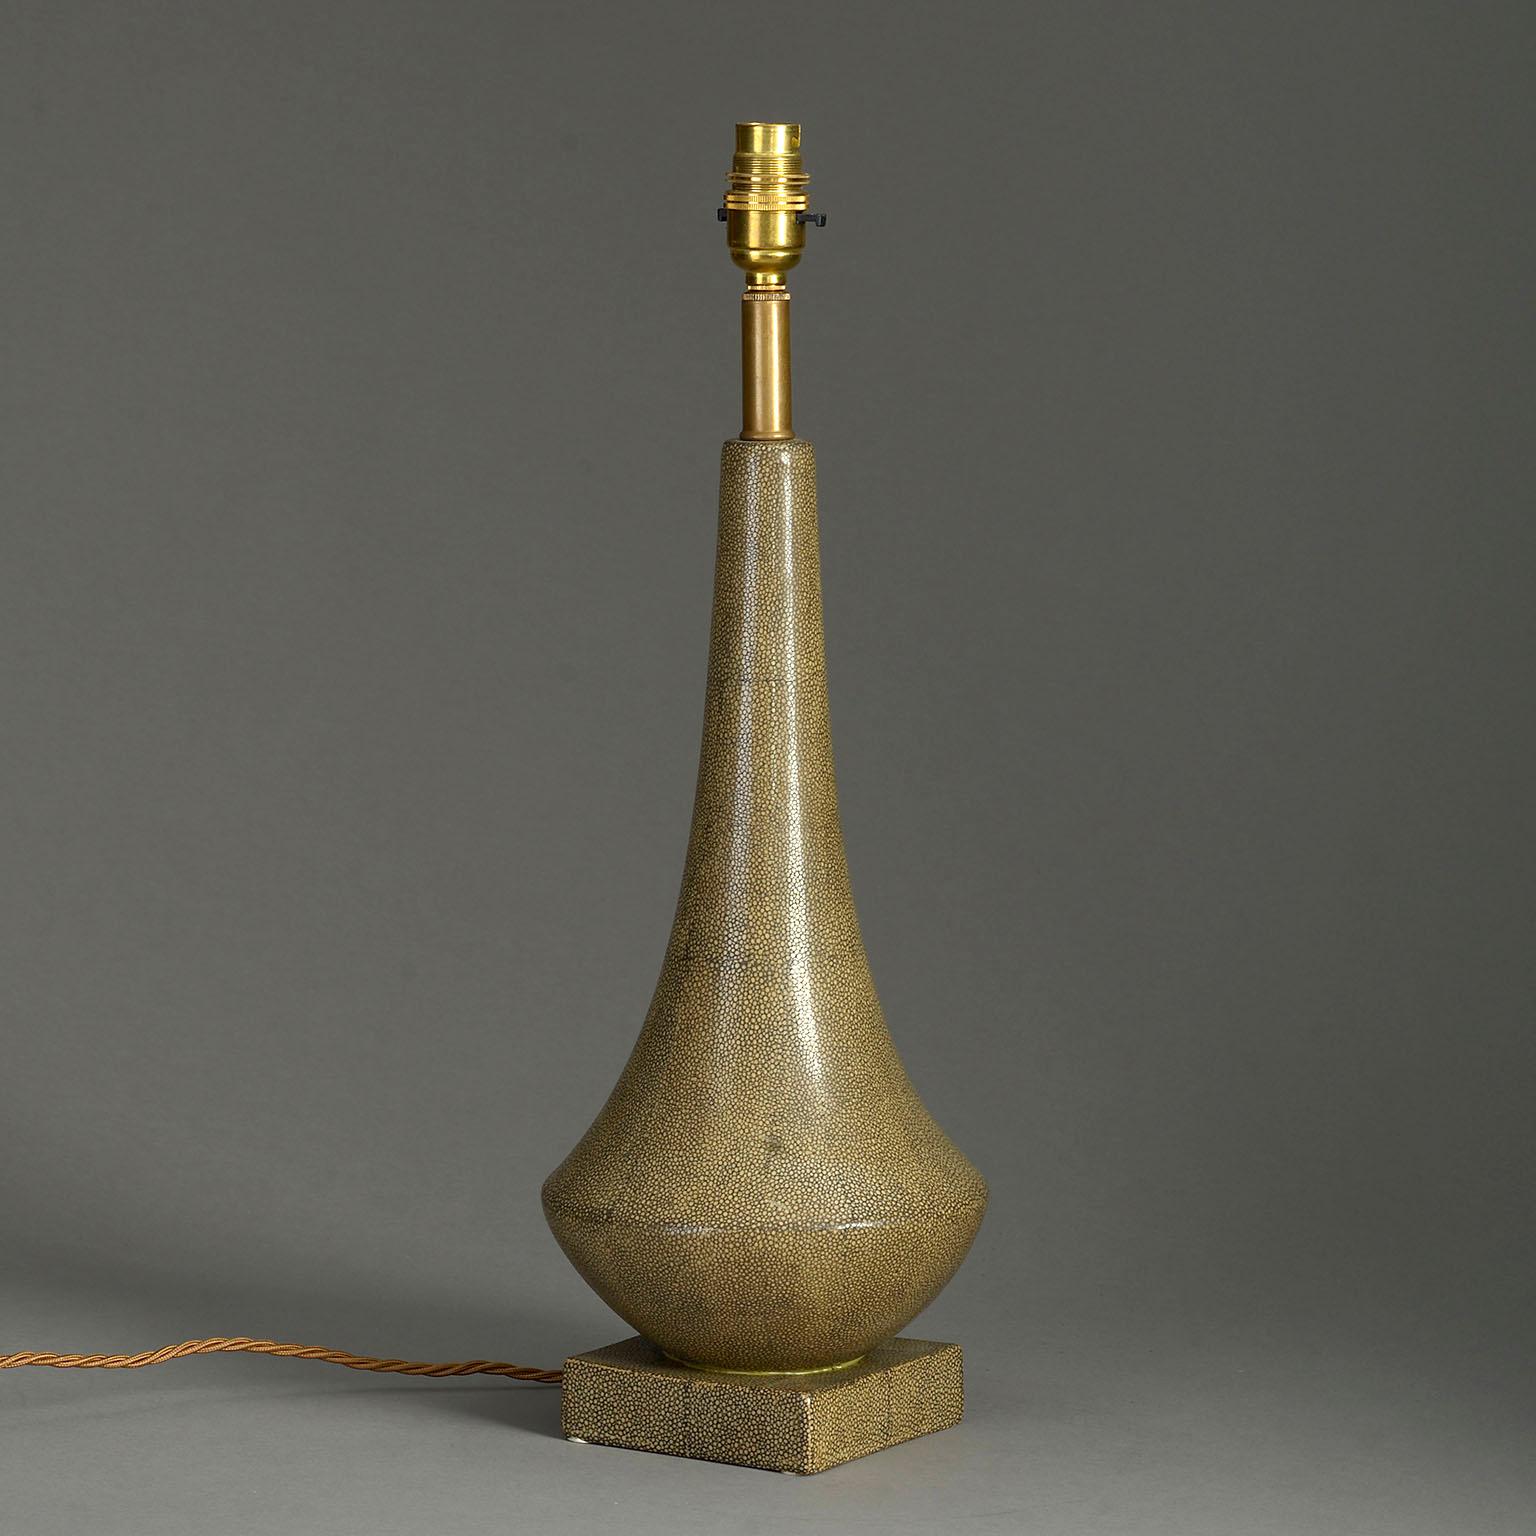 A mid-20th century faux shagreen glazed ceramic table lamp, the vase shaped stem set upon a square plinth.

Dimensions refer to ceramic parts.

Shade not included.